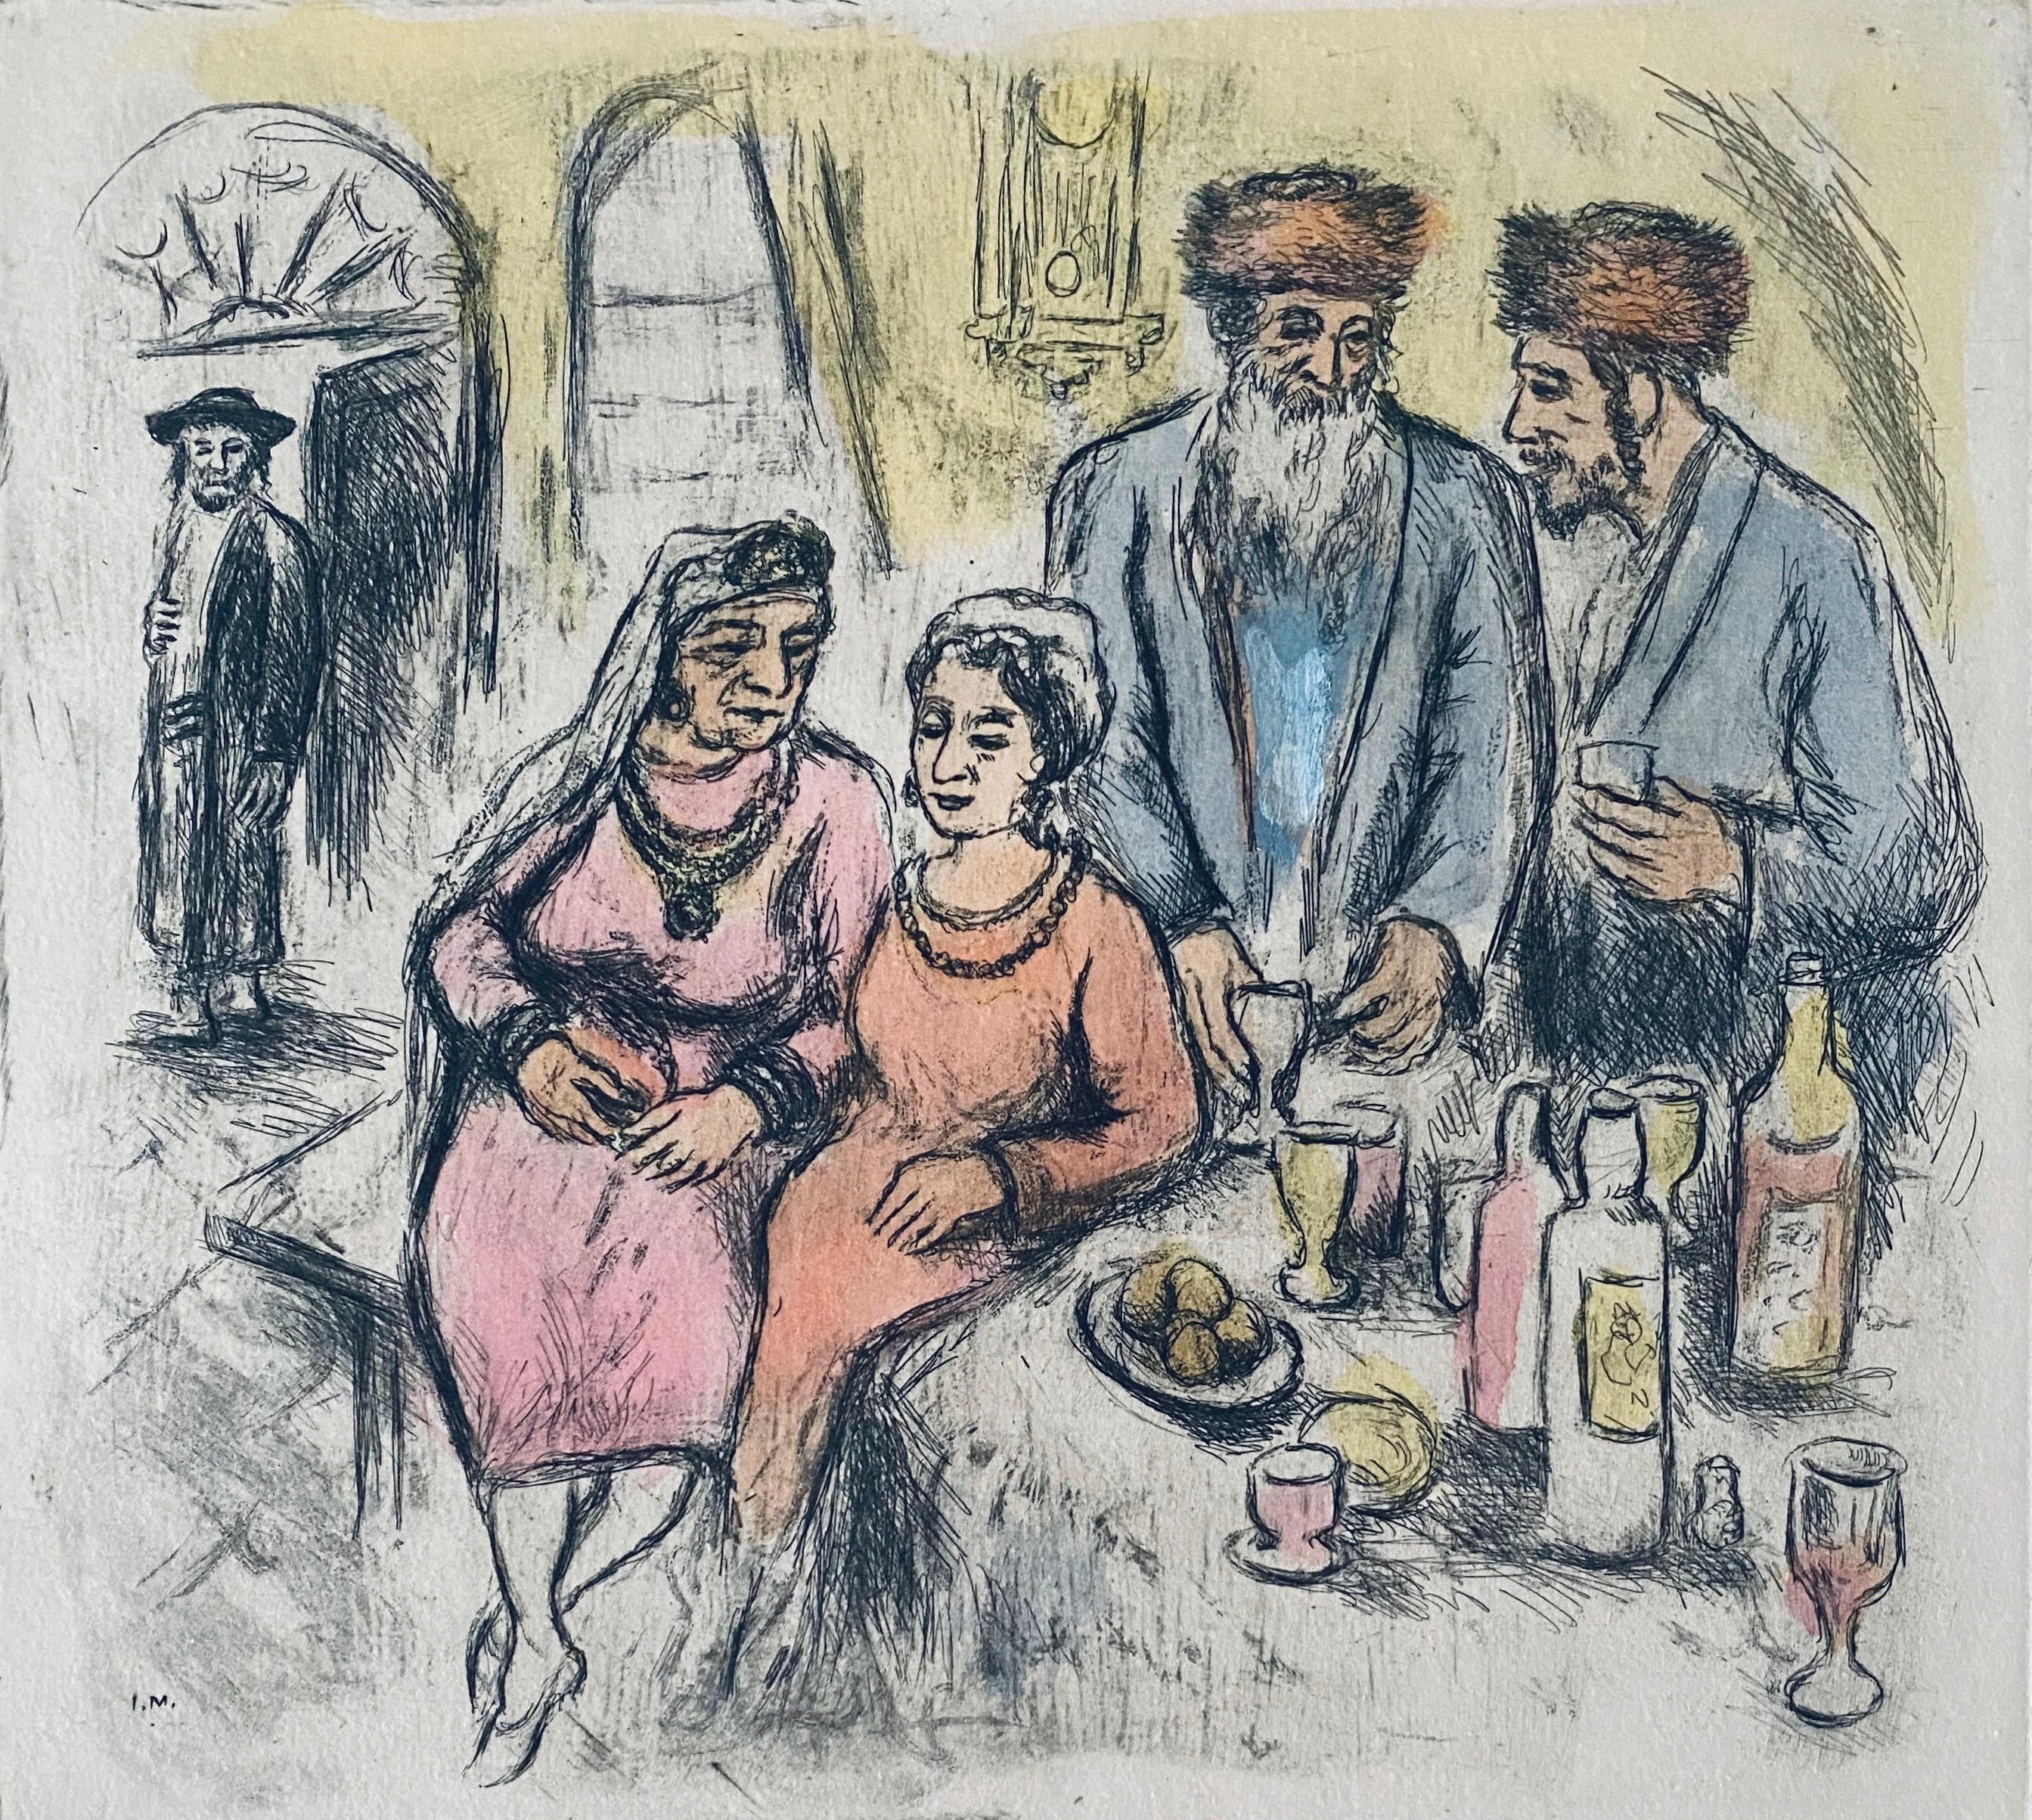 Judaica interior scene etching with hand coloring - Print by Ira Moskowitz